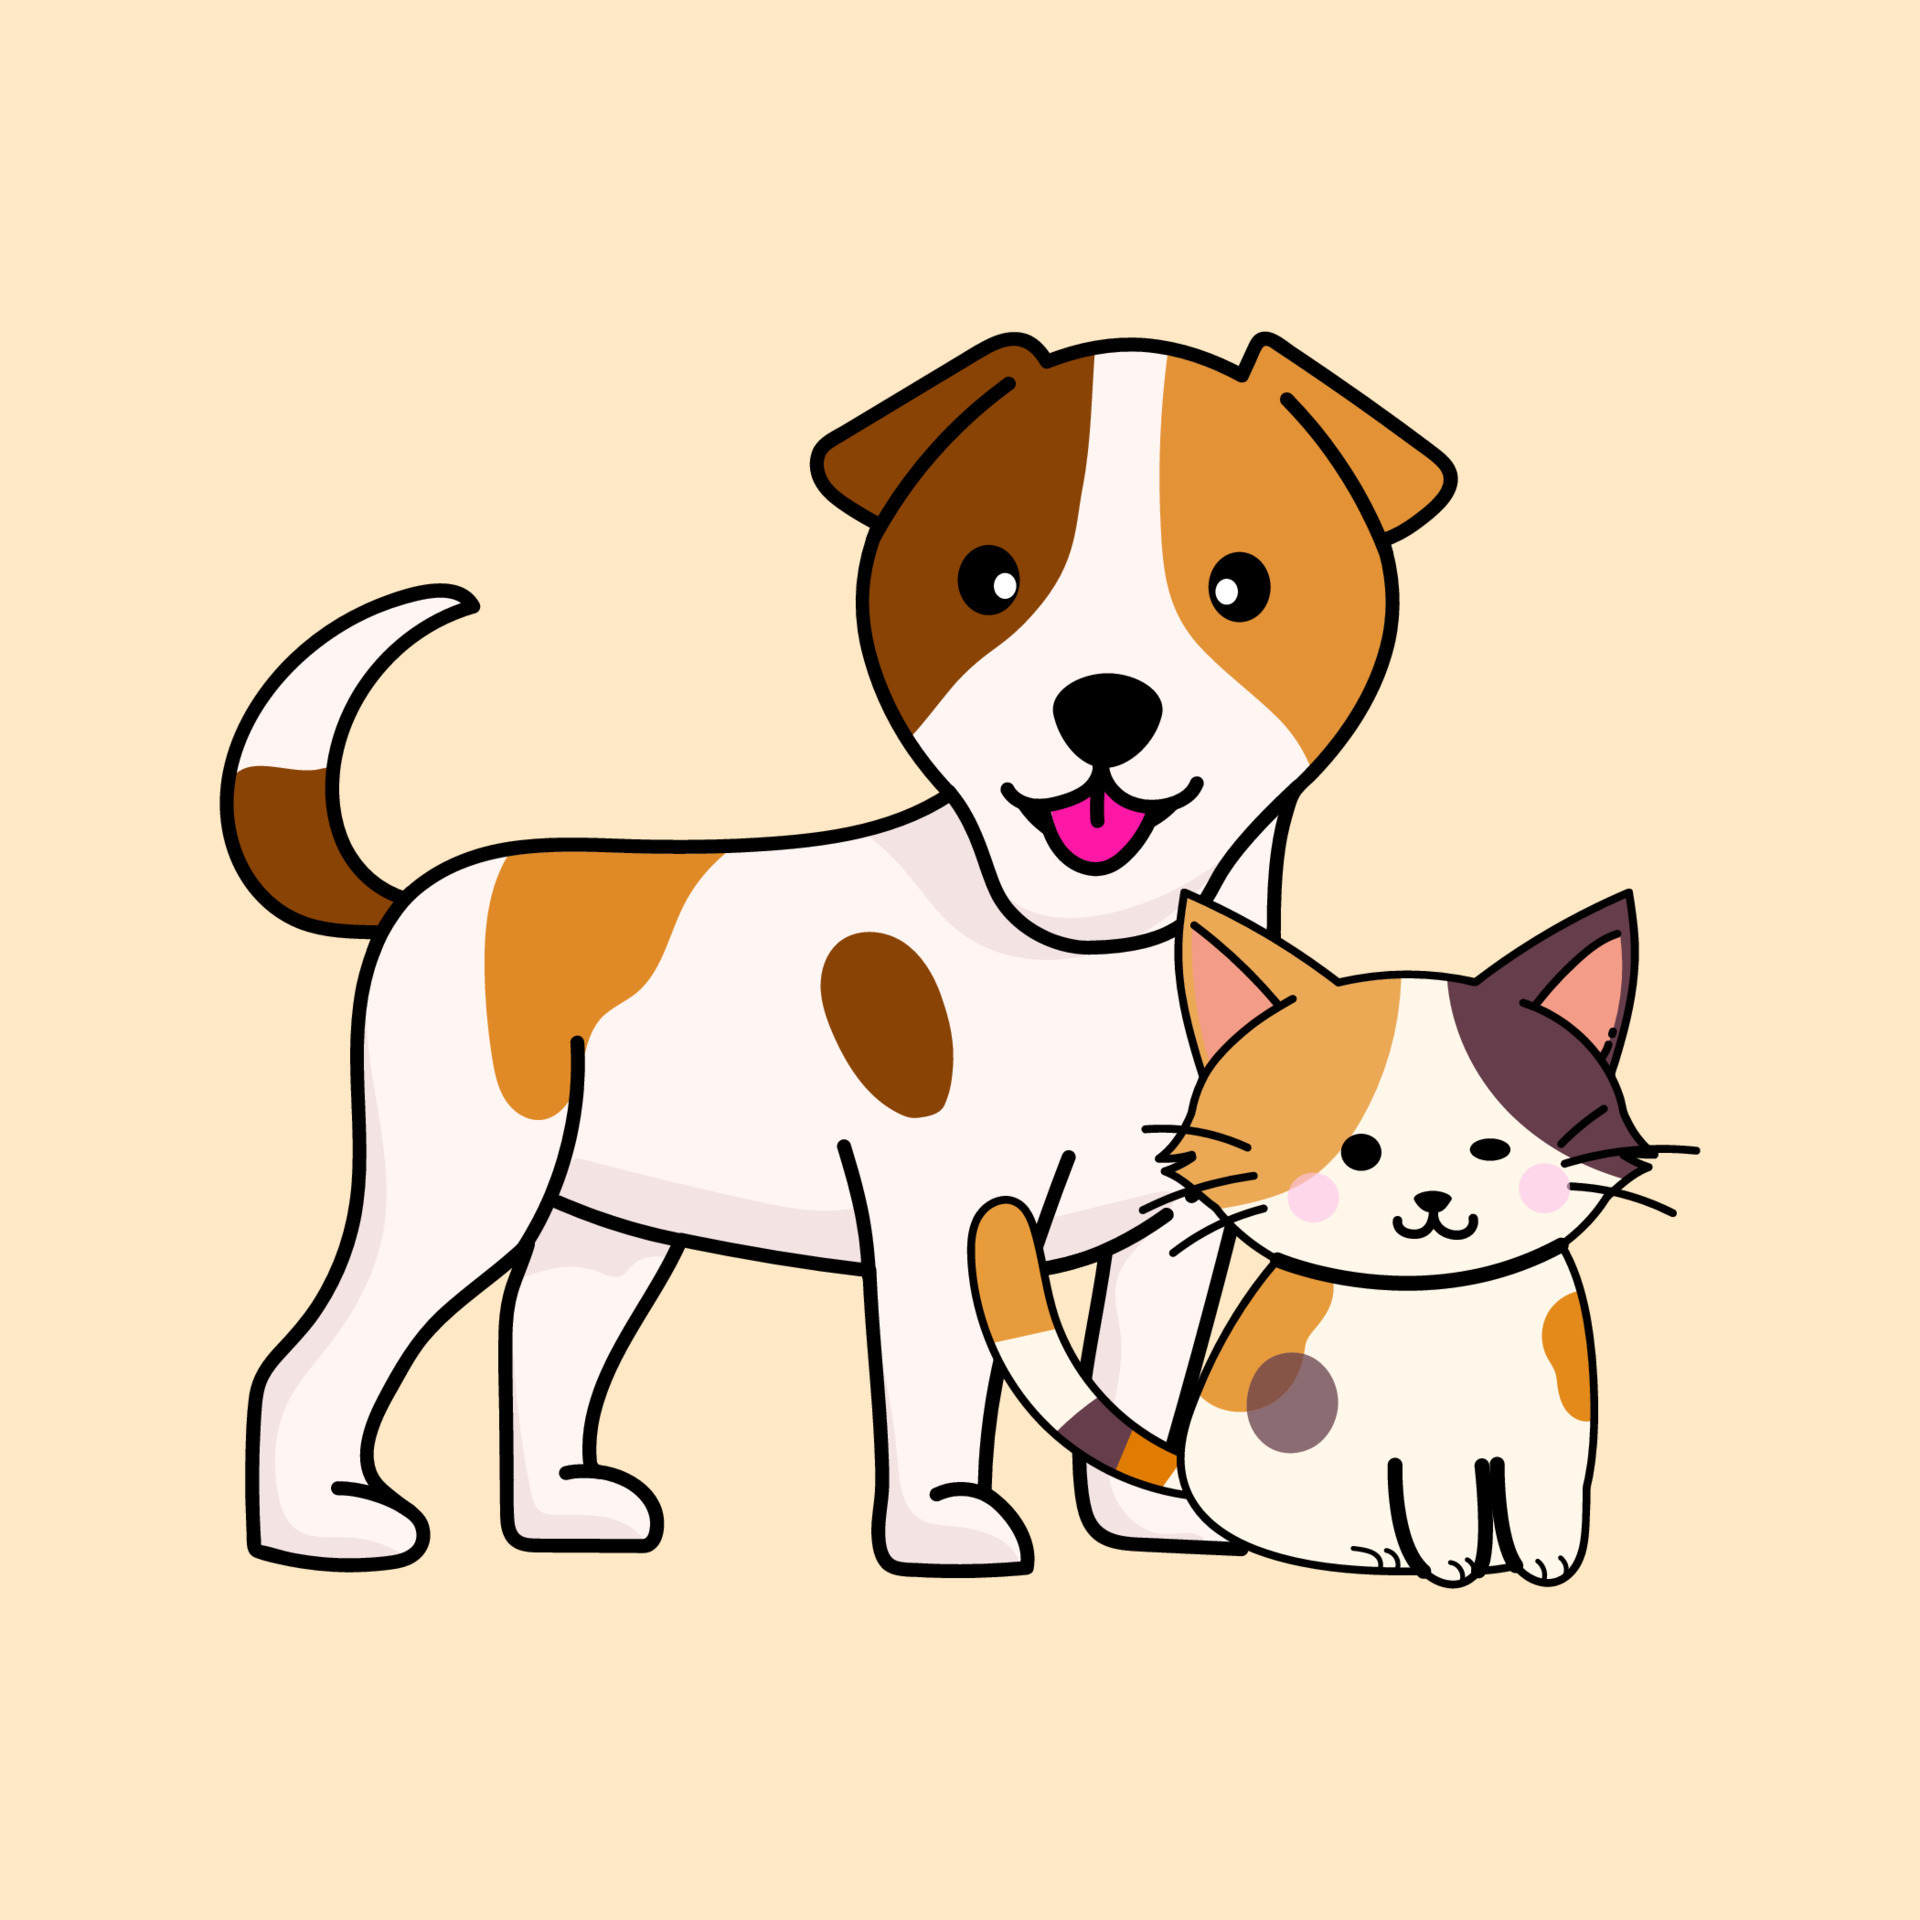 Cute dog and cat cartoon pet animal icon, character vector ...